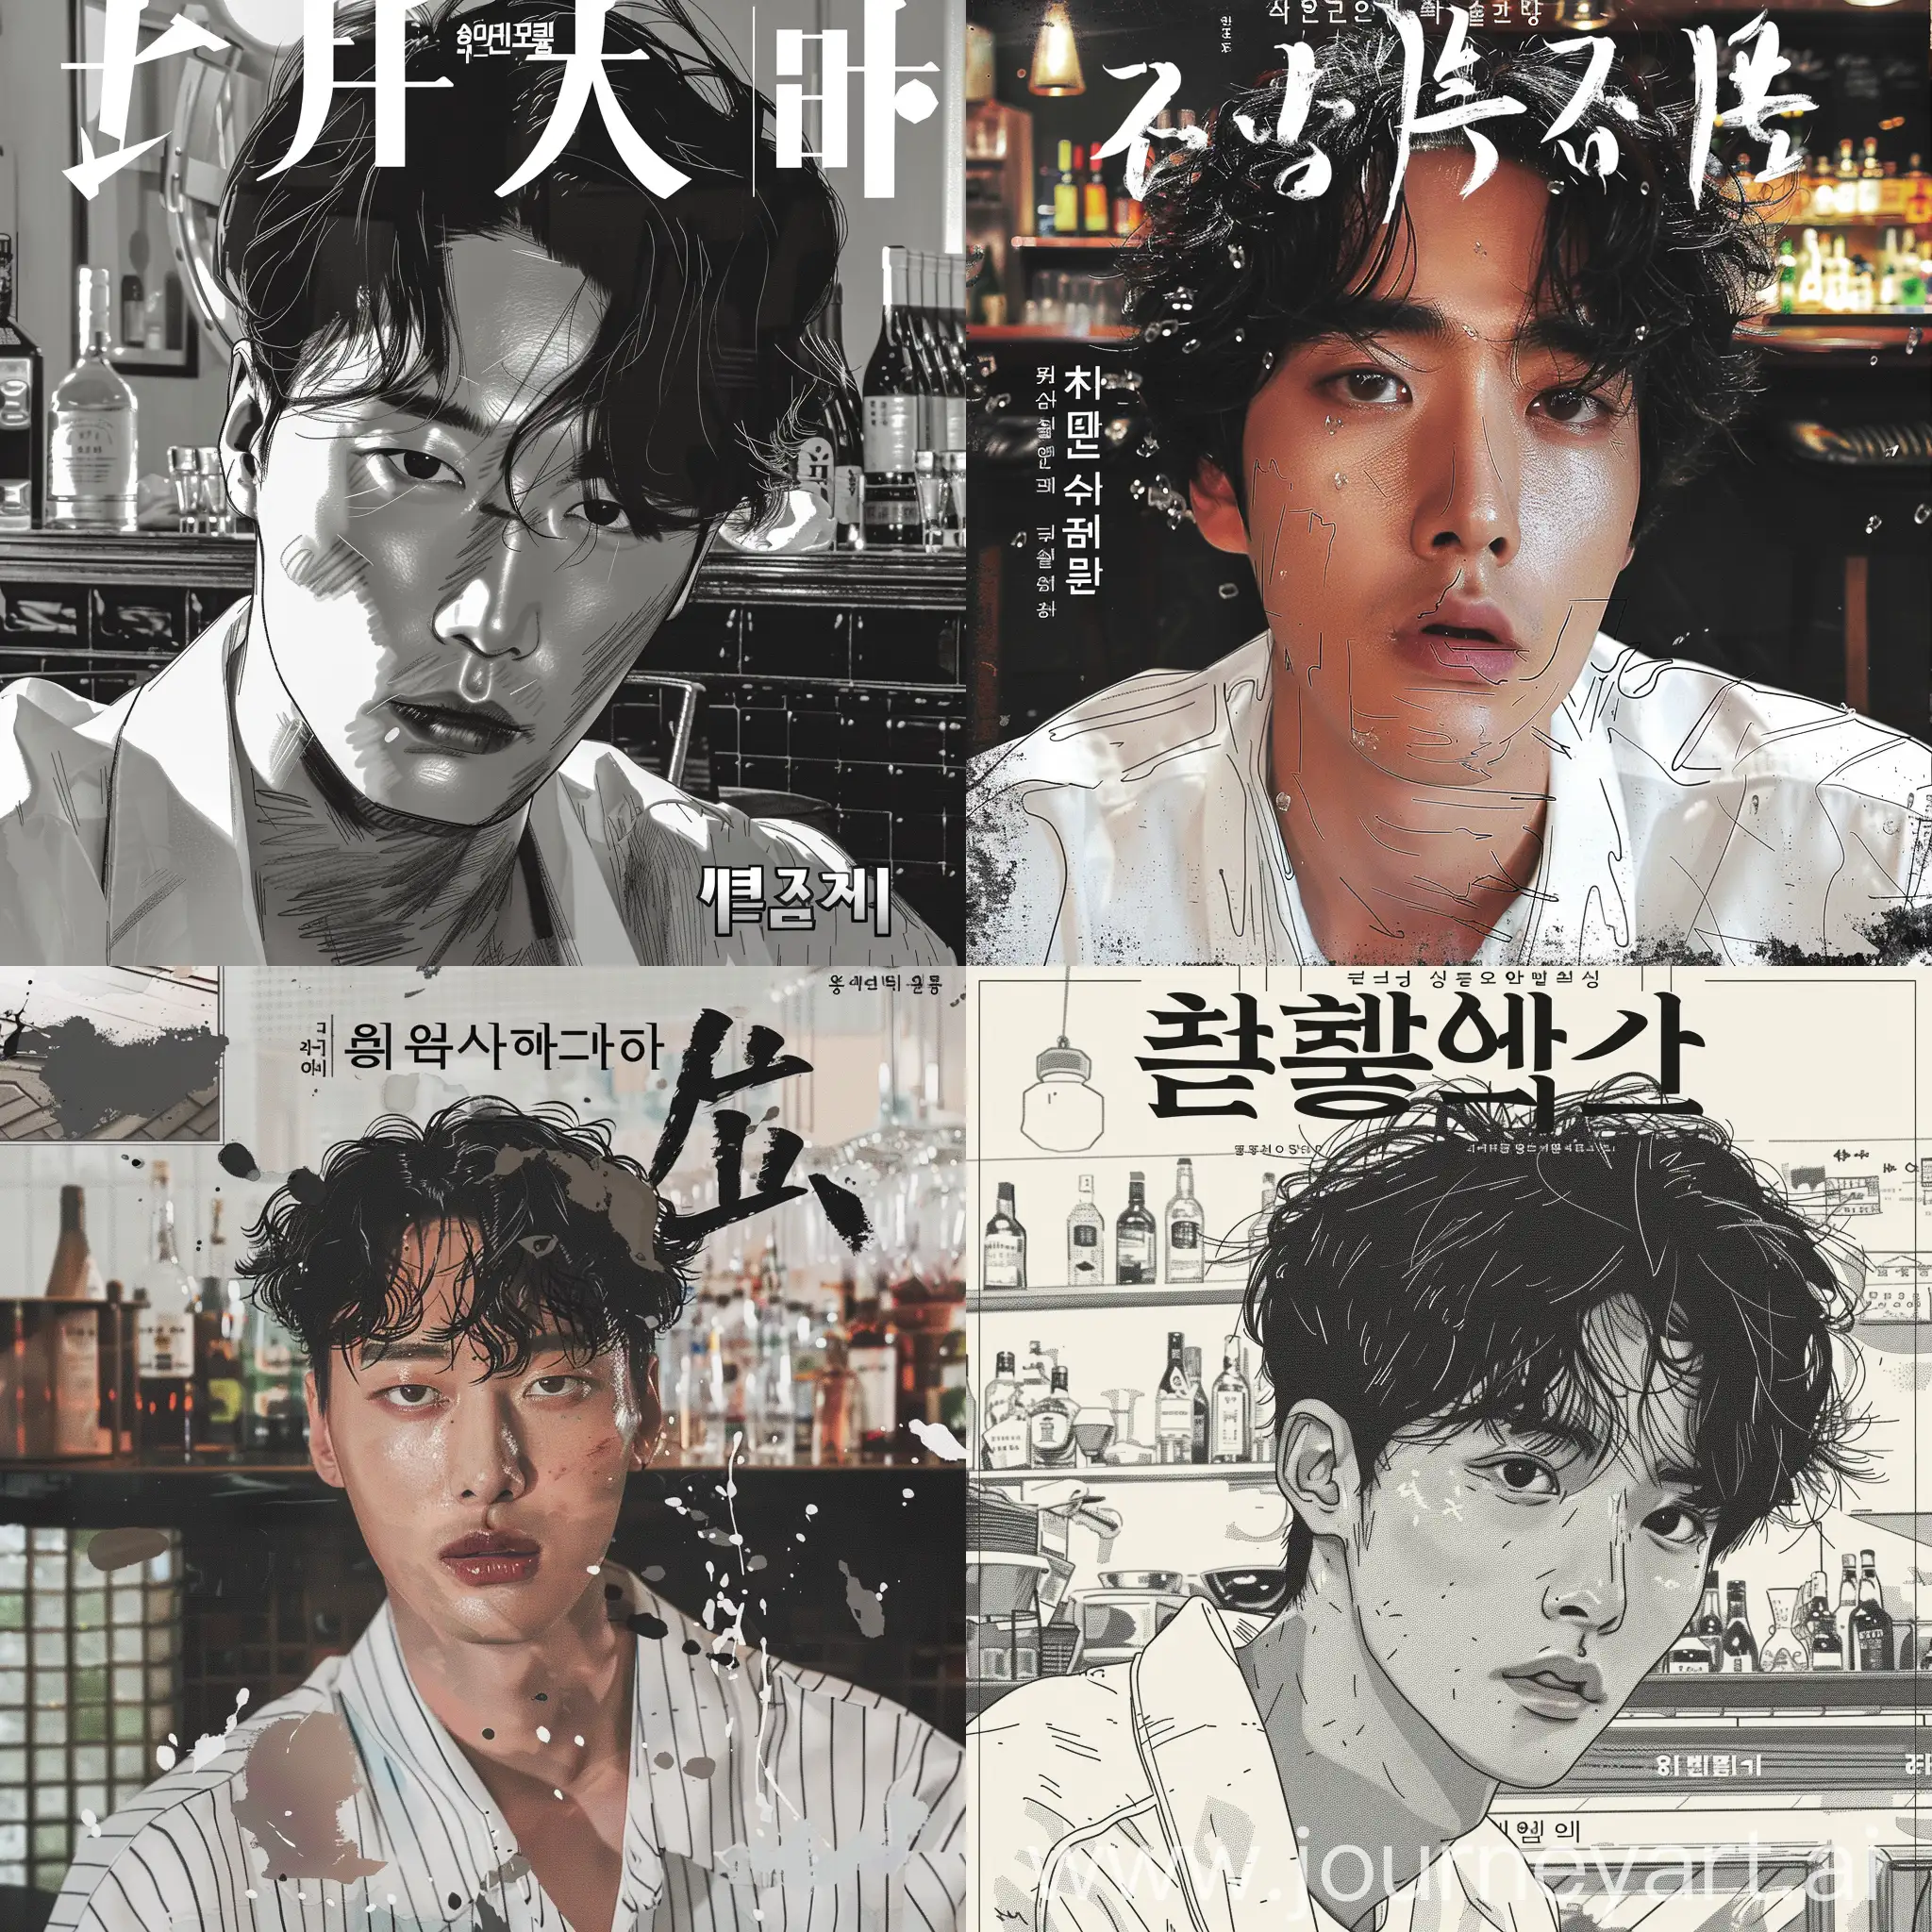 The magazine cover displayed the fashion model looking to the camera with strong gaze.  The cute Korean male fashion model is dress up in minimal theme with white and black color palette in rough line. There is a magazine title "เรนโอเมก้าสายบู๊" at the top of this poster. In the background is the urban city bar.. Stylish in the style of fashion magazine cover 